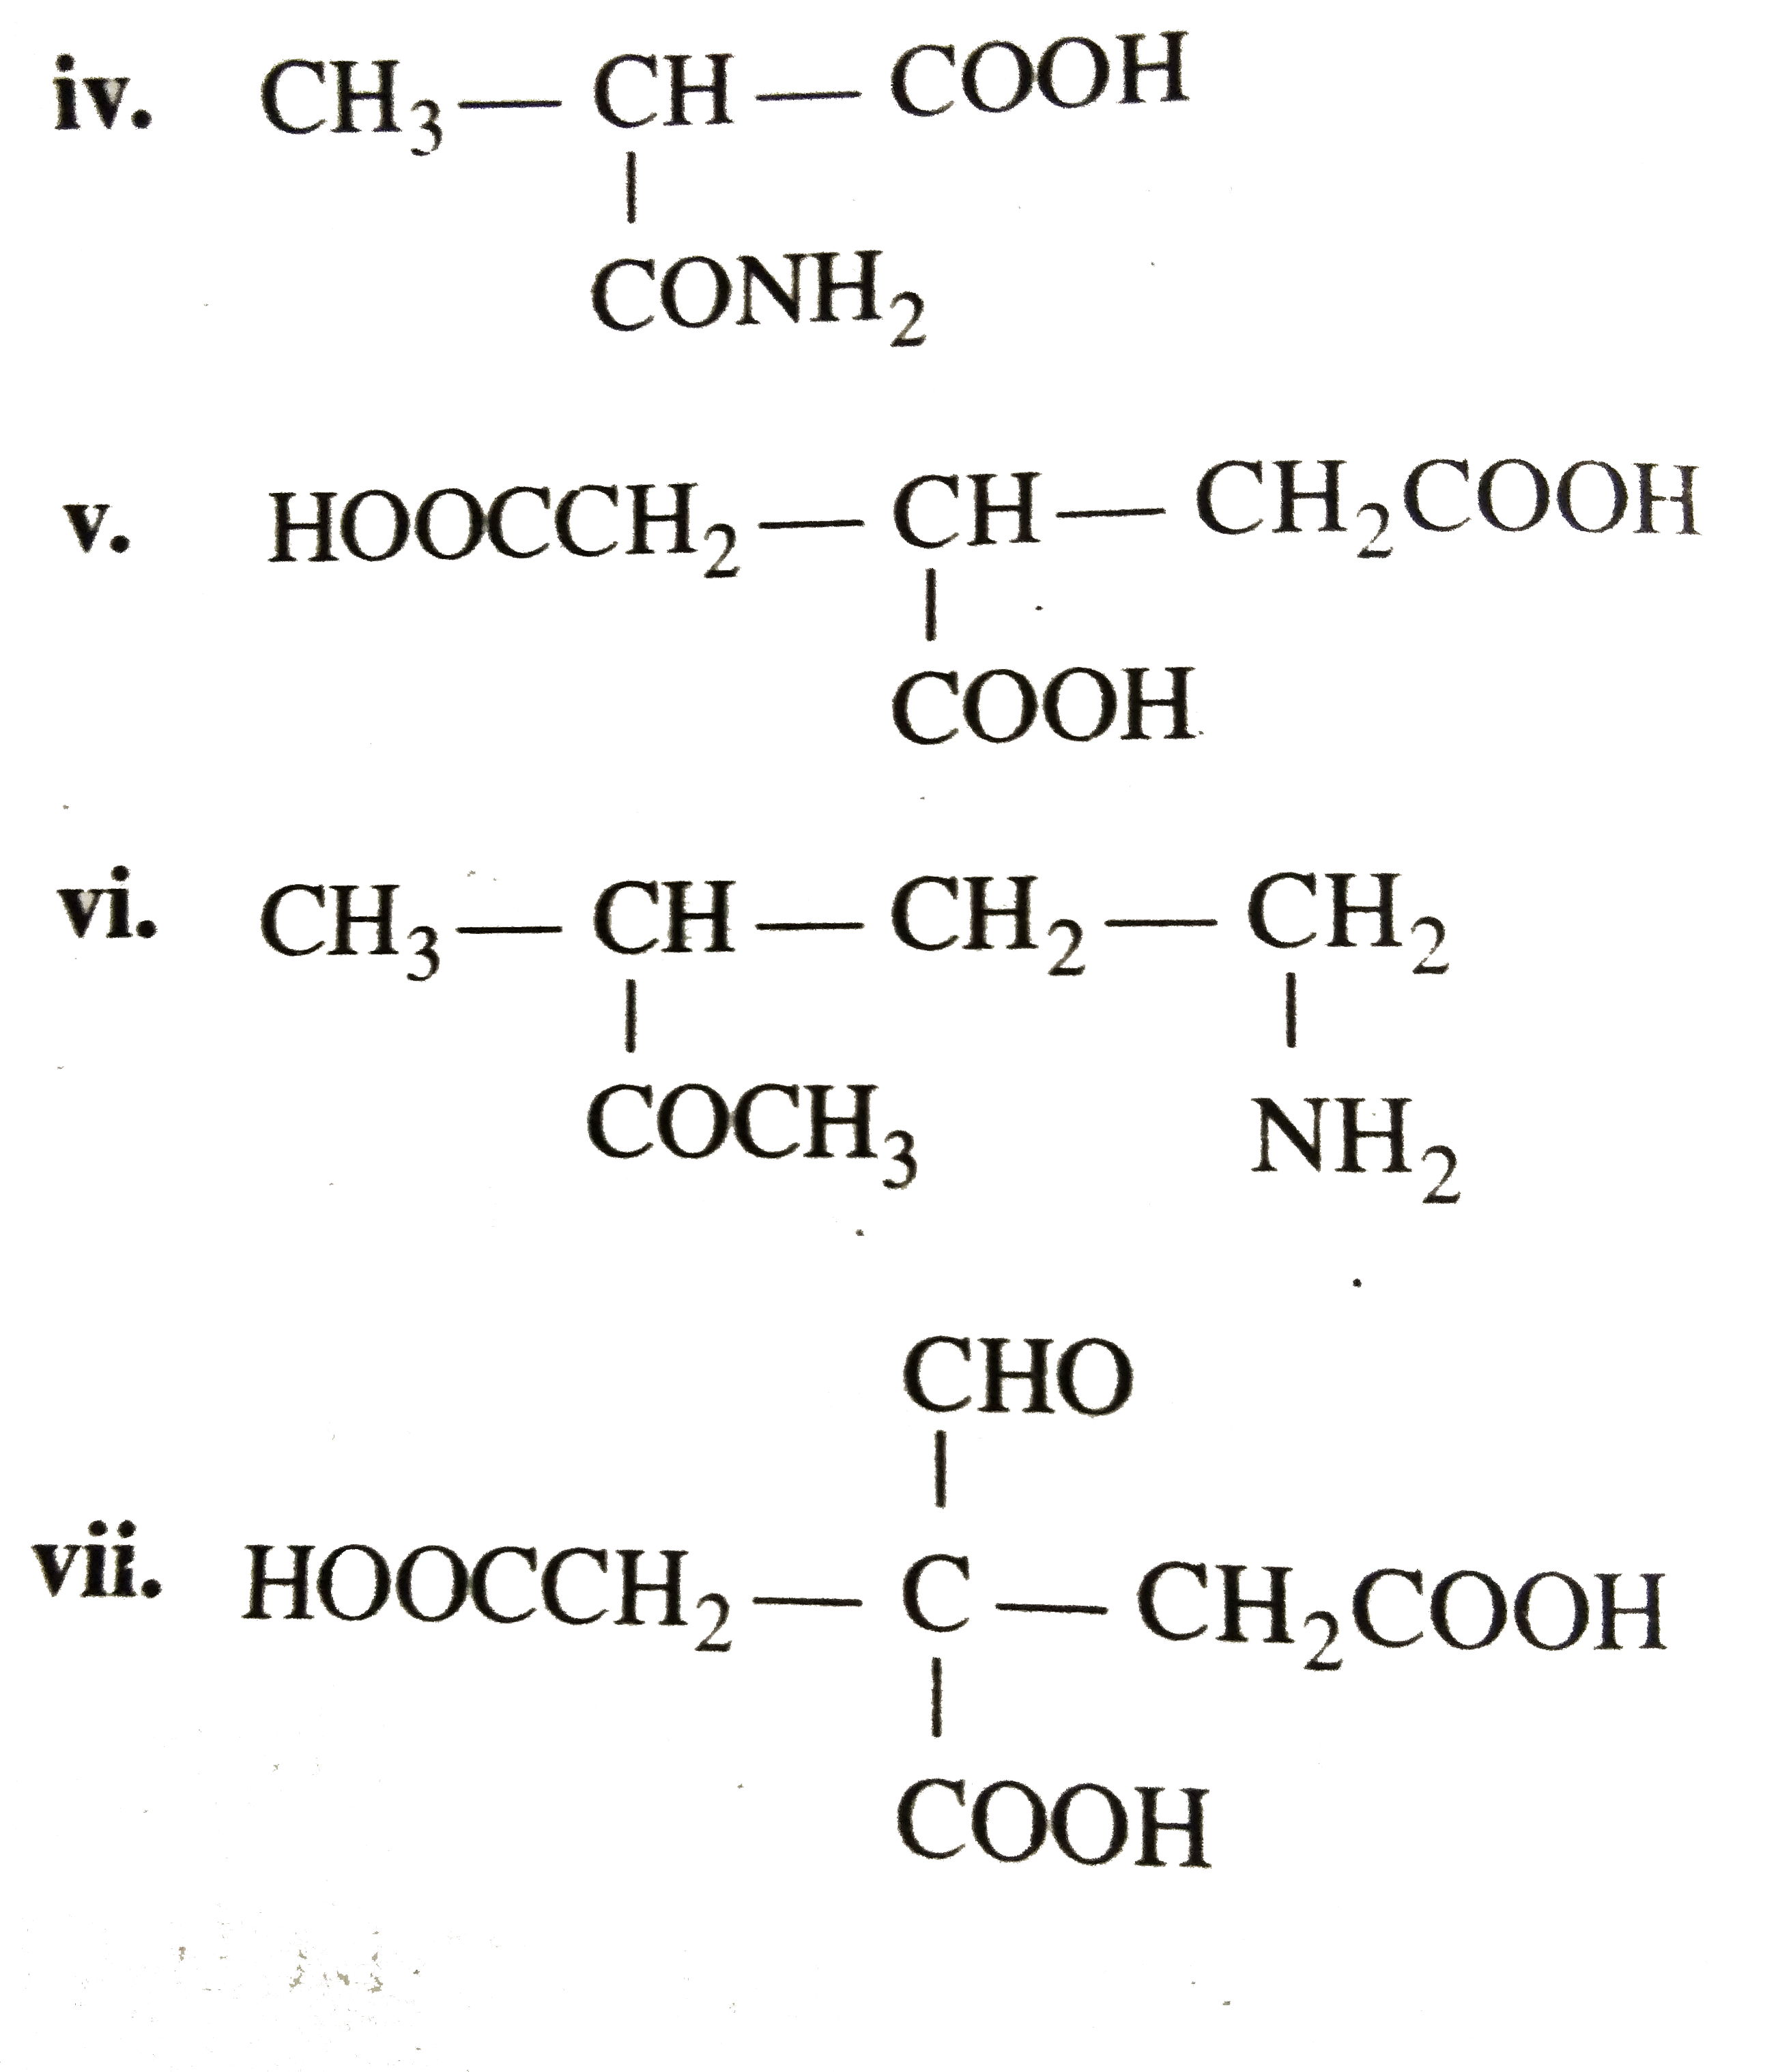 Give The Iupac Names For The Following Polyfunctional Compounds